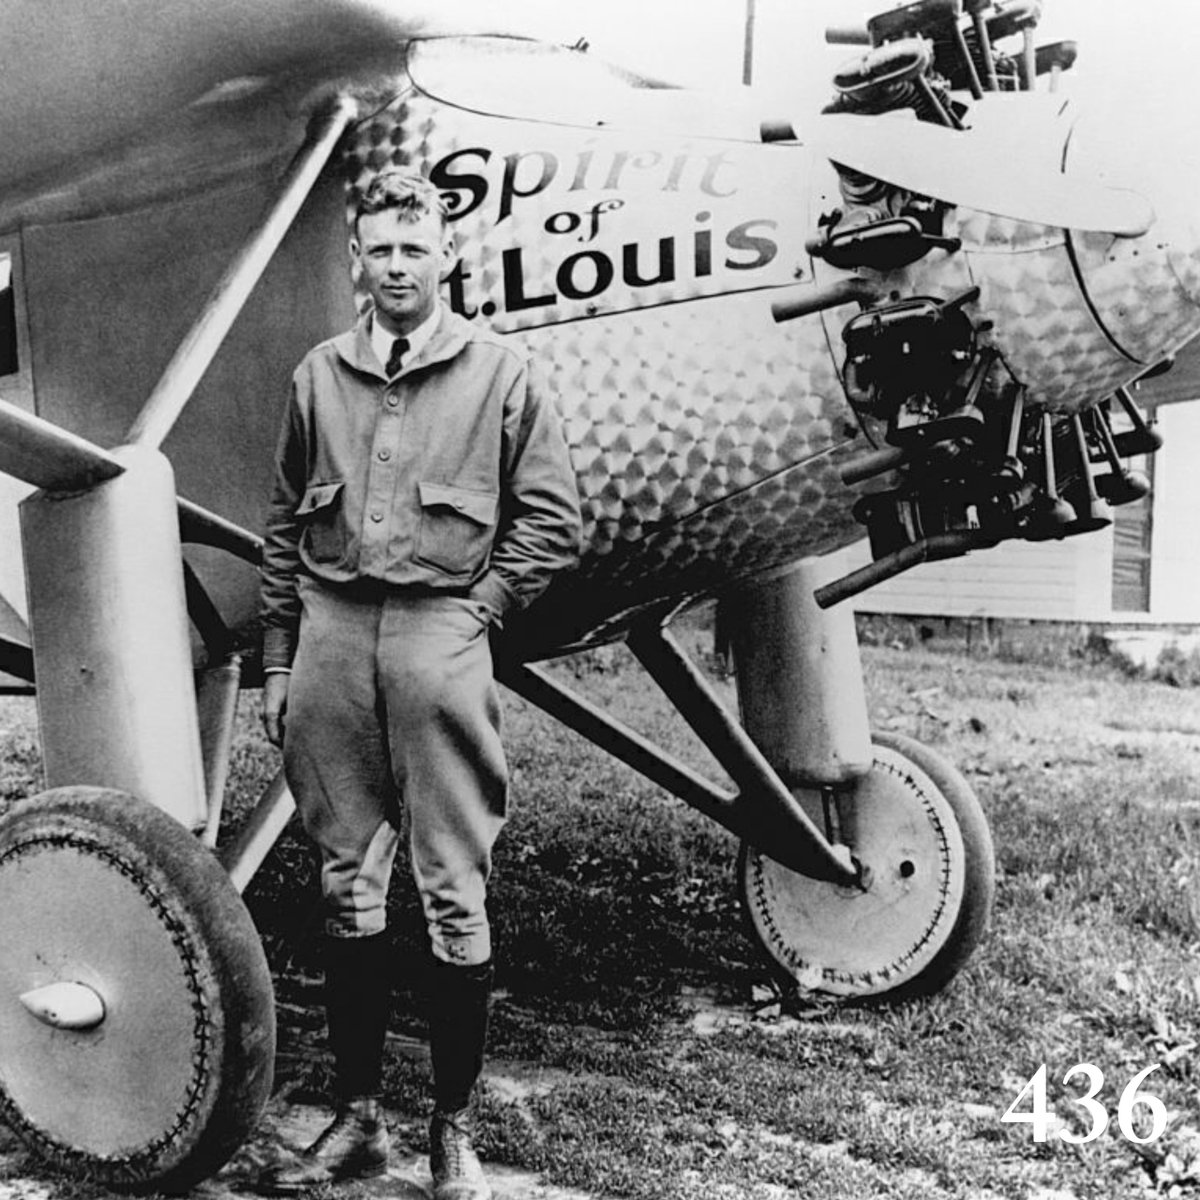 On May 21, 1927, Charles Lindbergh made the first solo and non-stop flight across the Atlantic in his plane, the Spirit of St Louis. Today also marks 436 days since Cllr Sarah Warren said she wanted a healthy debate on LTNs and how we get around in Bath. Was it a flight of fancy?